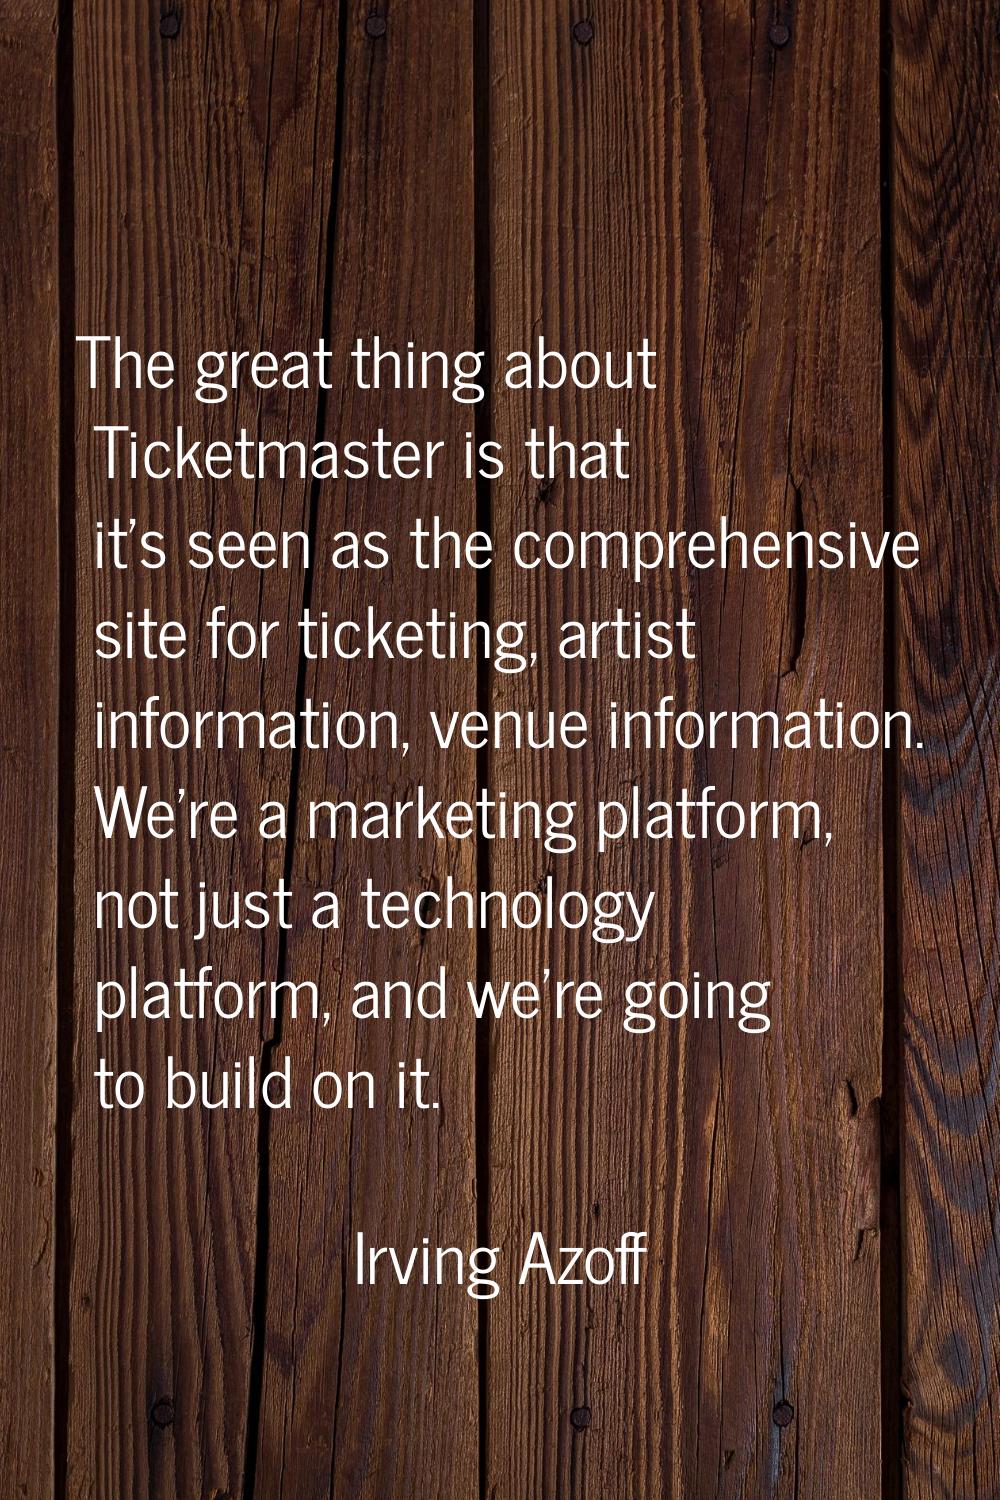 The great thing about Ticketmaster is that it's seen as the comprehensive site for ticketing, artis